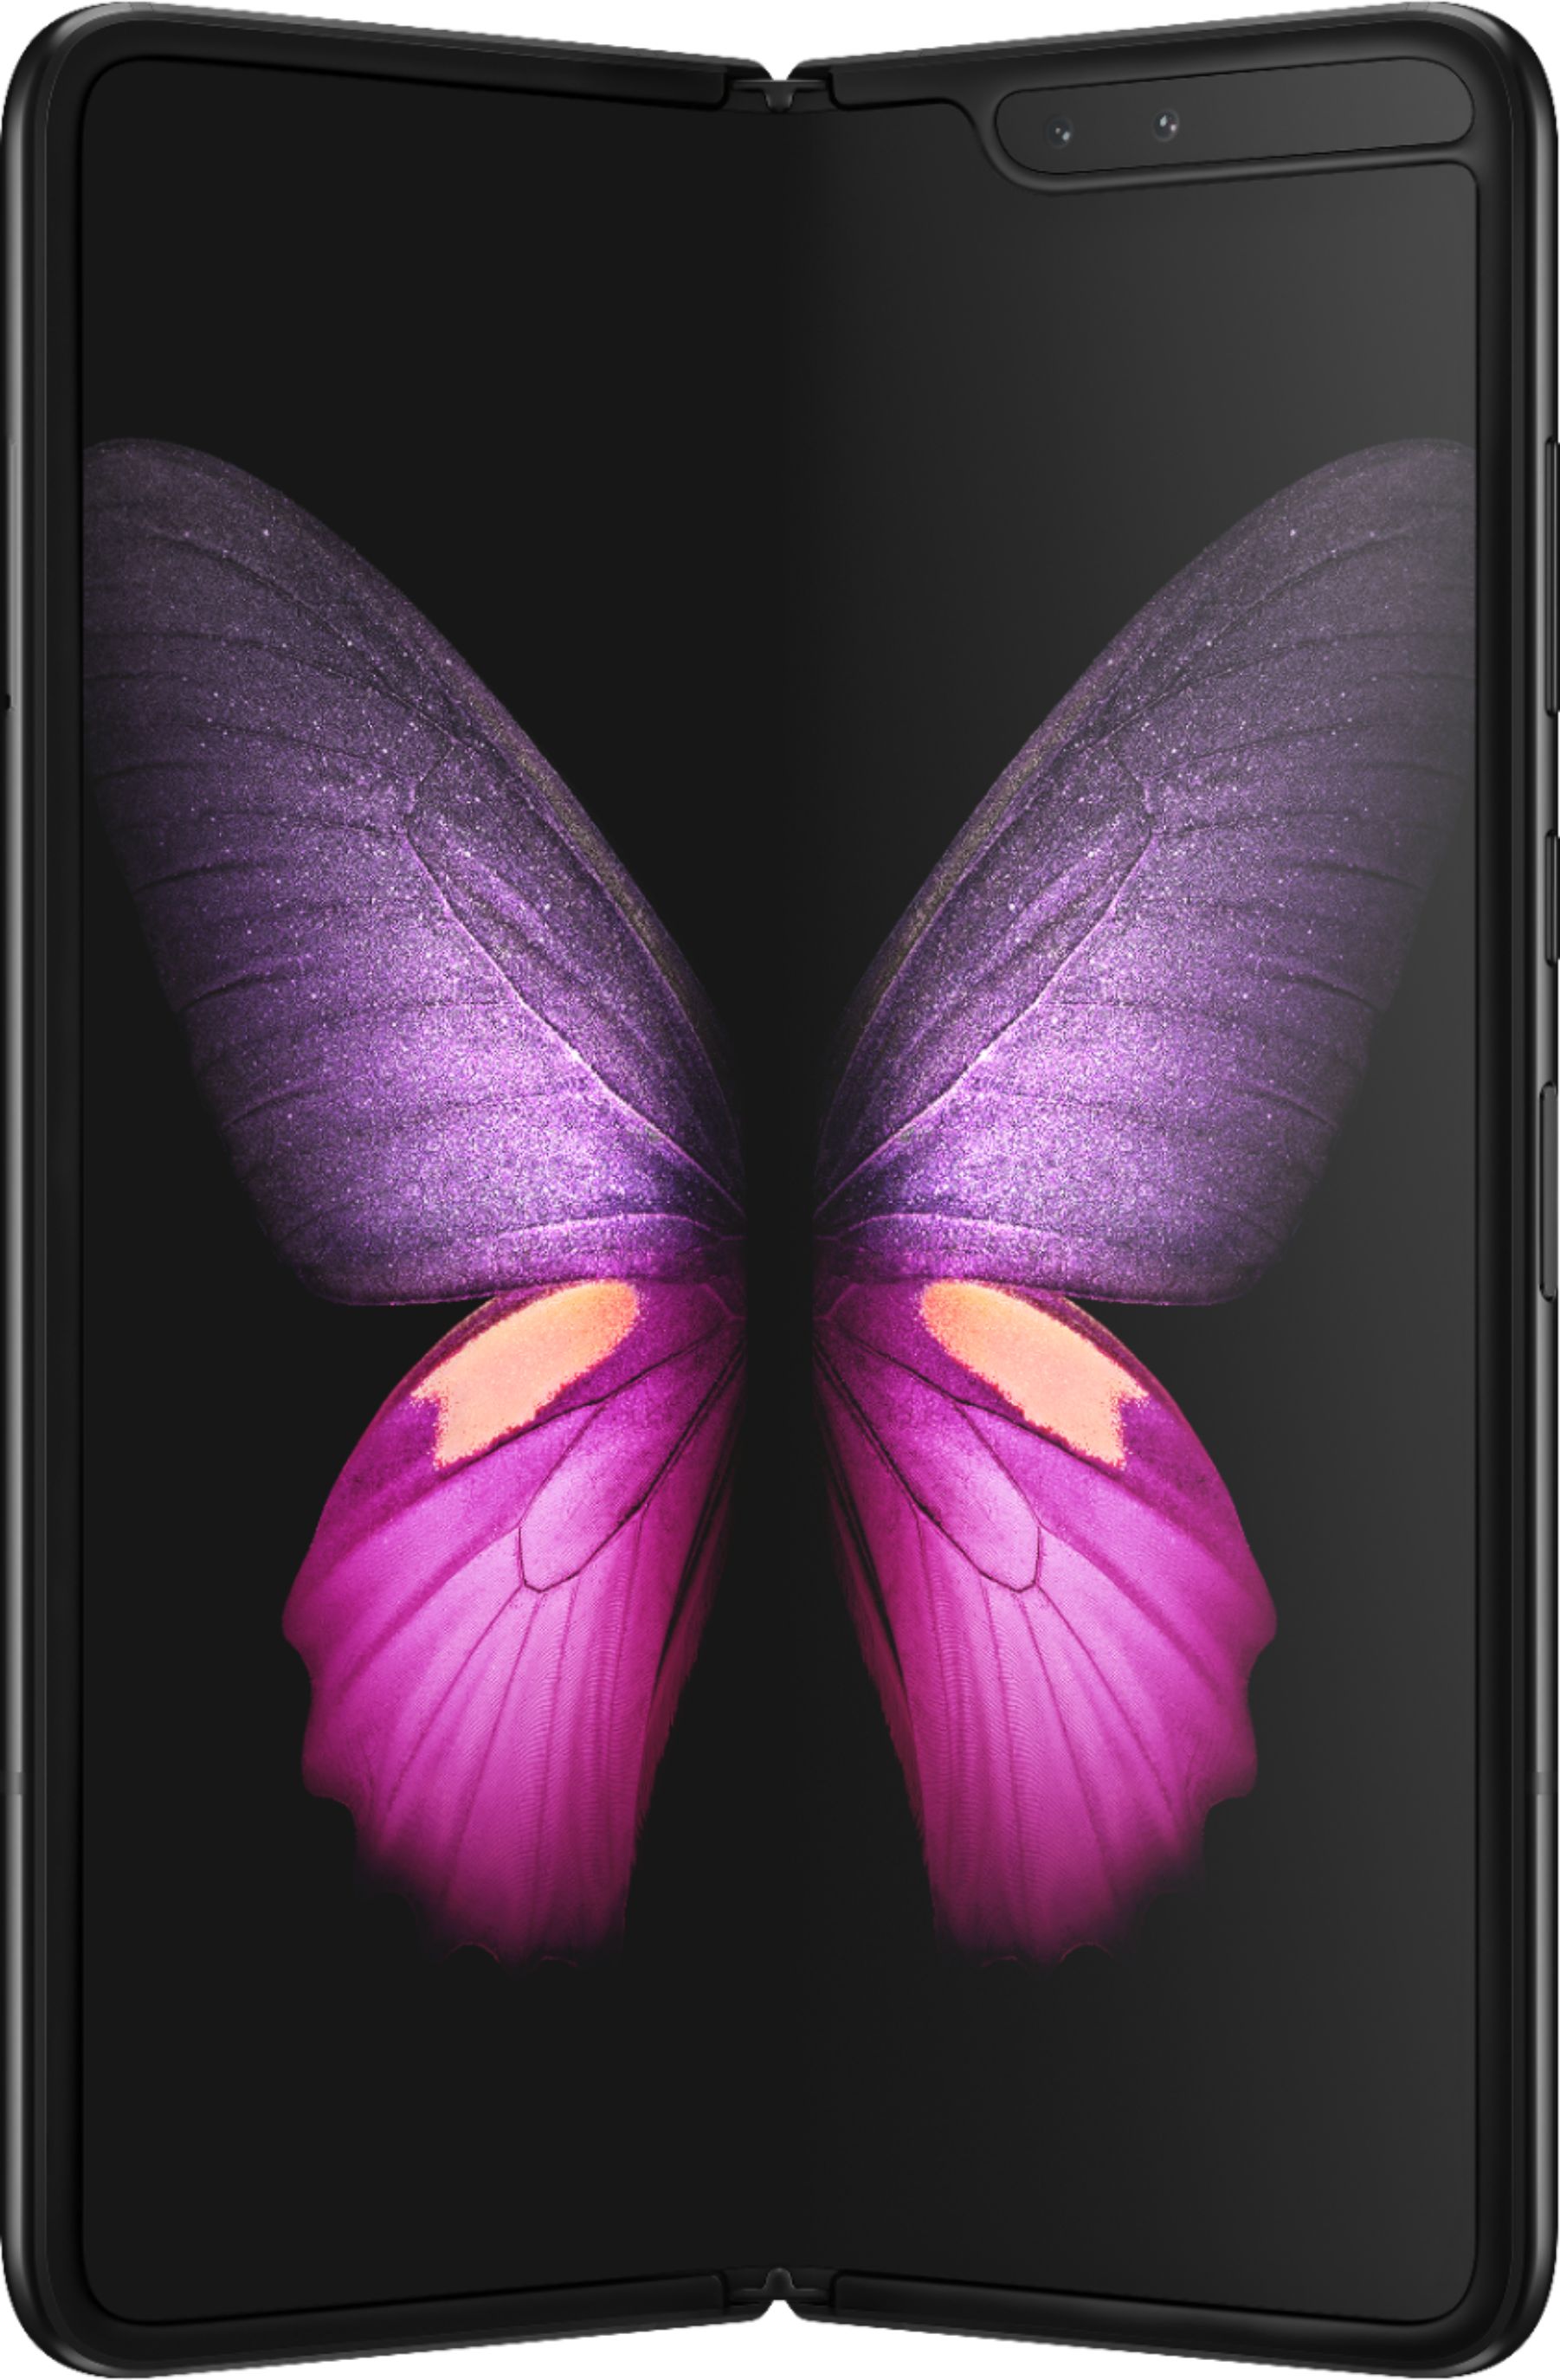 Samsung - Geek Squad Certified Refurbished Galaxy Fold with 512GB Memory Cell Phone (Unlocked) - Cosmos Black